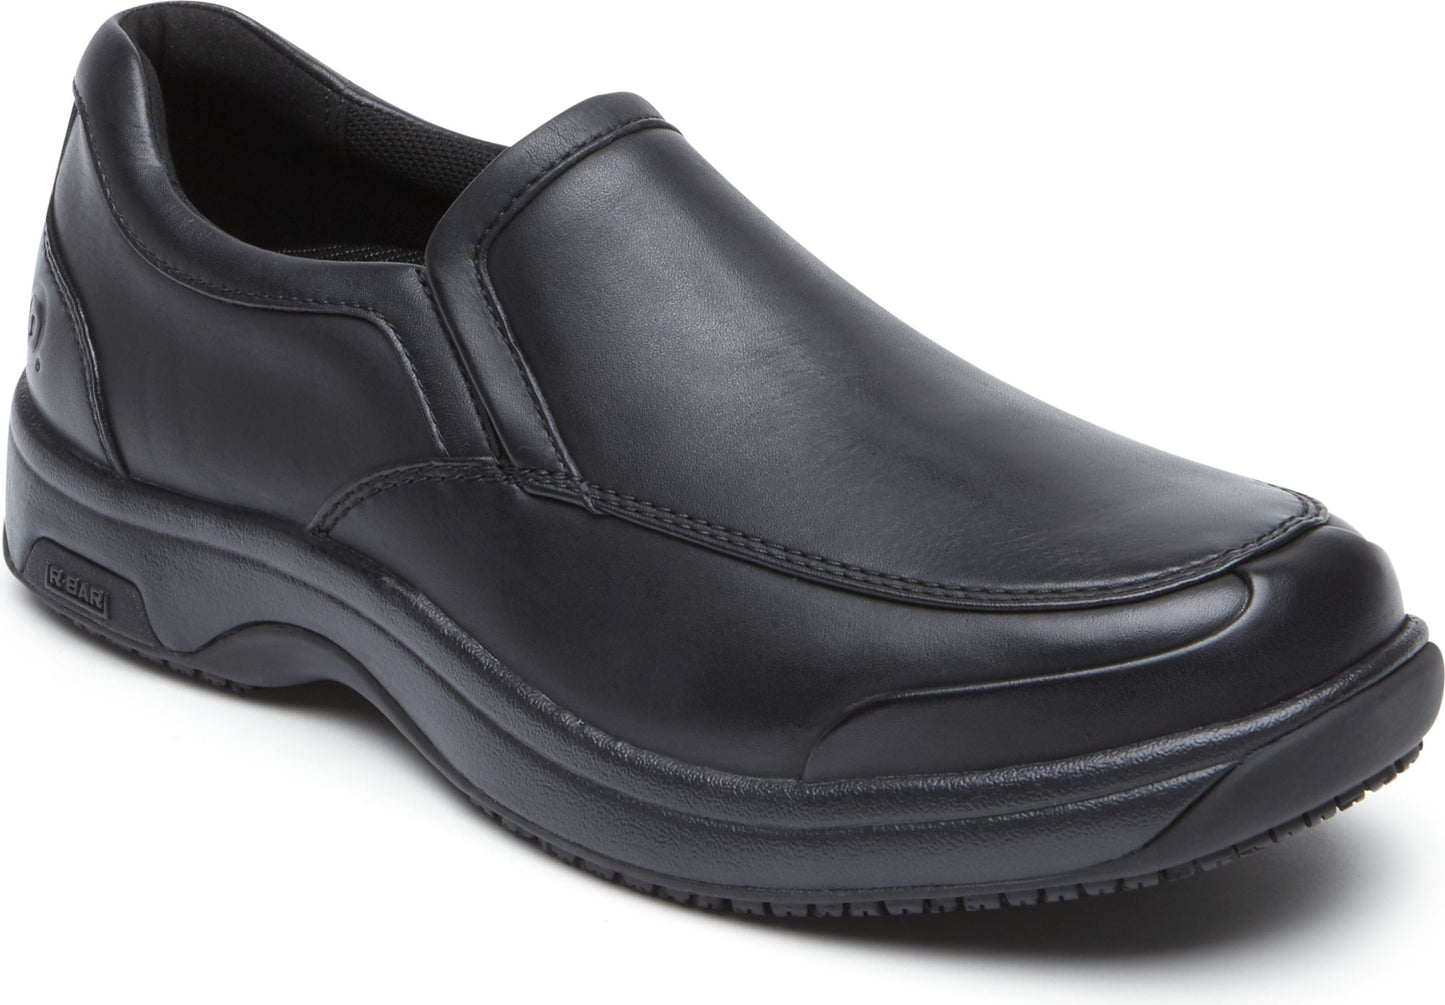 Dunhan Shoes 8000 Battery Park Service Slip-on Black - Wide